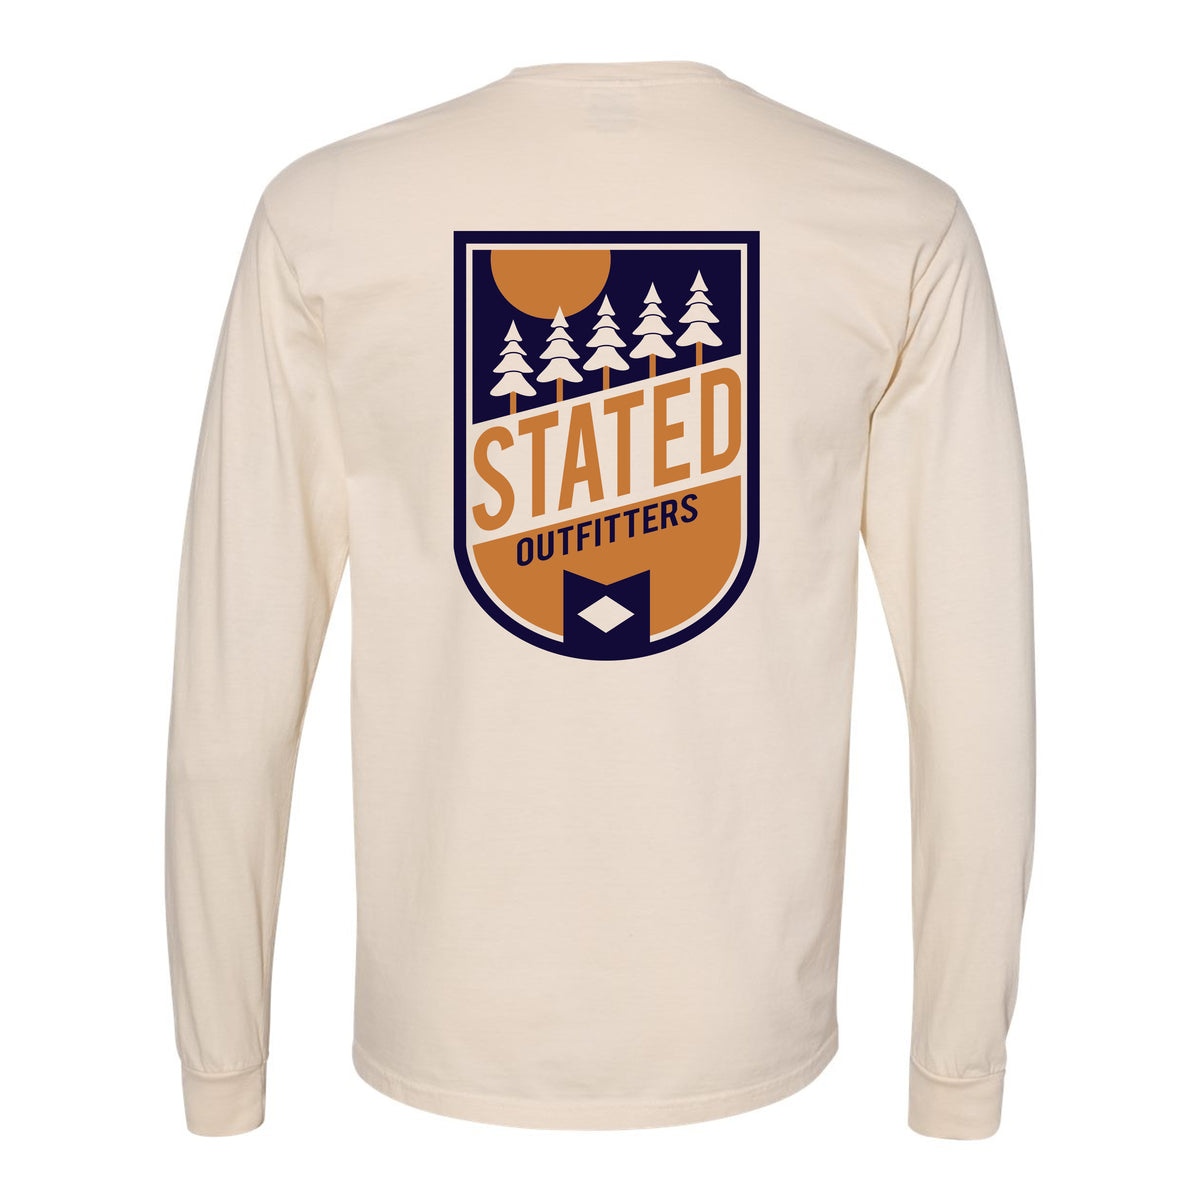 Stated Outfitters Sunset Hill Badge Sweatshirt